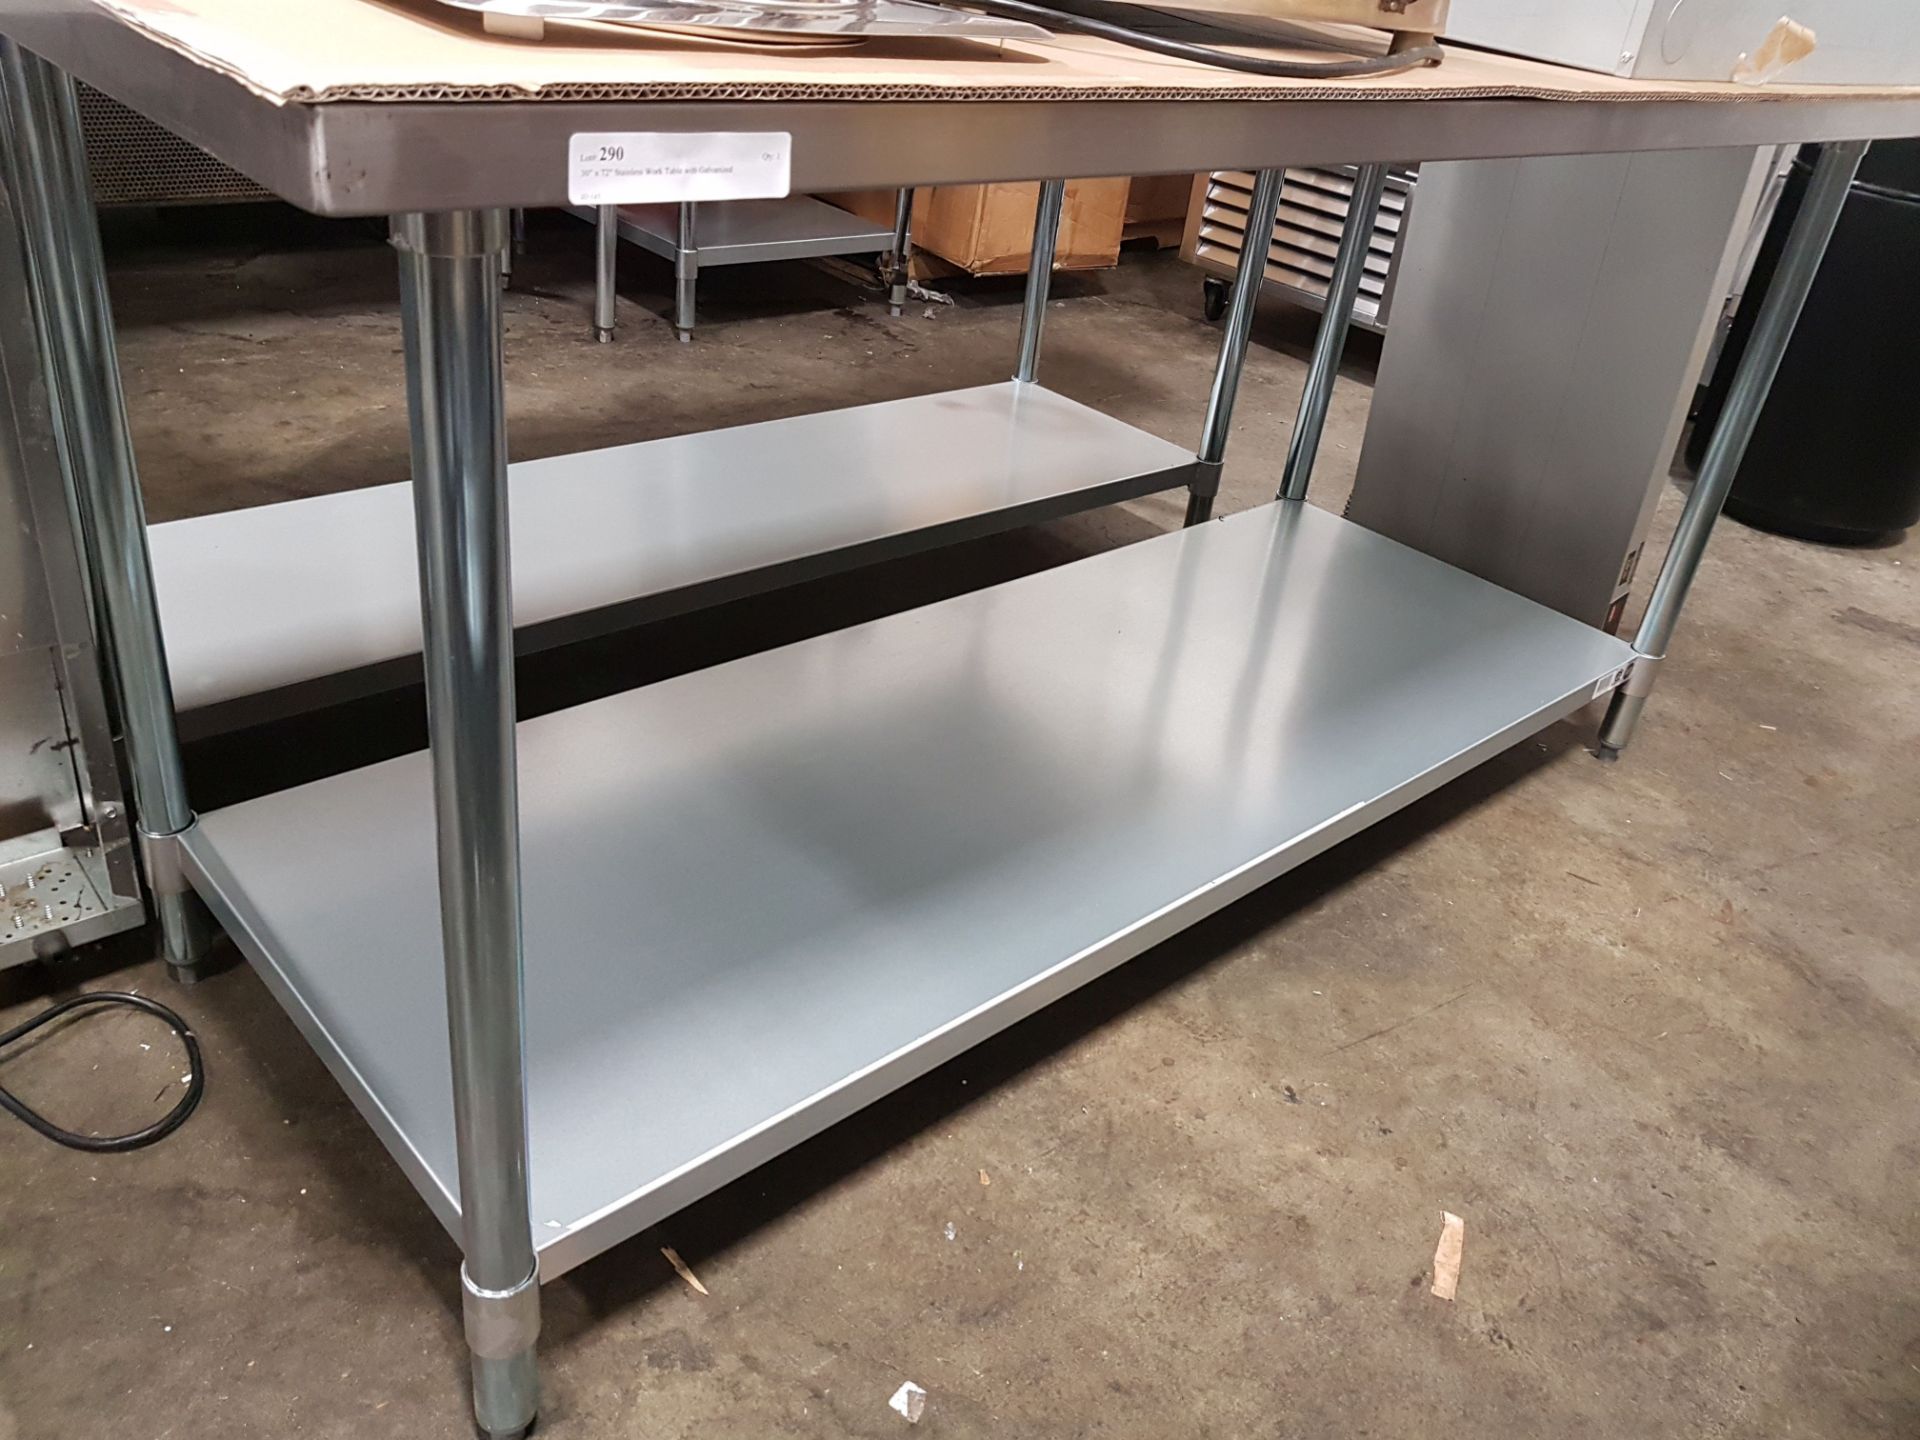 30" x 72" Stainless Work Table with Galvanized Under Shelf